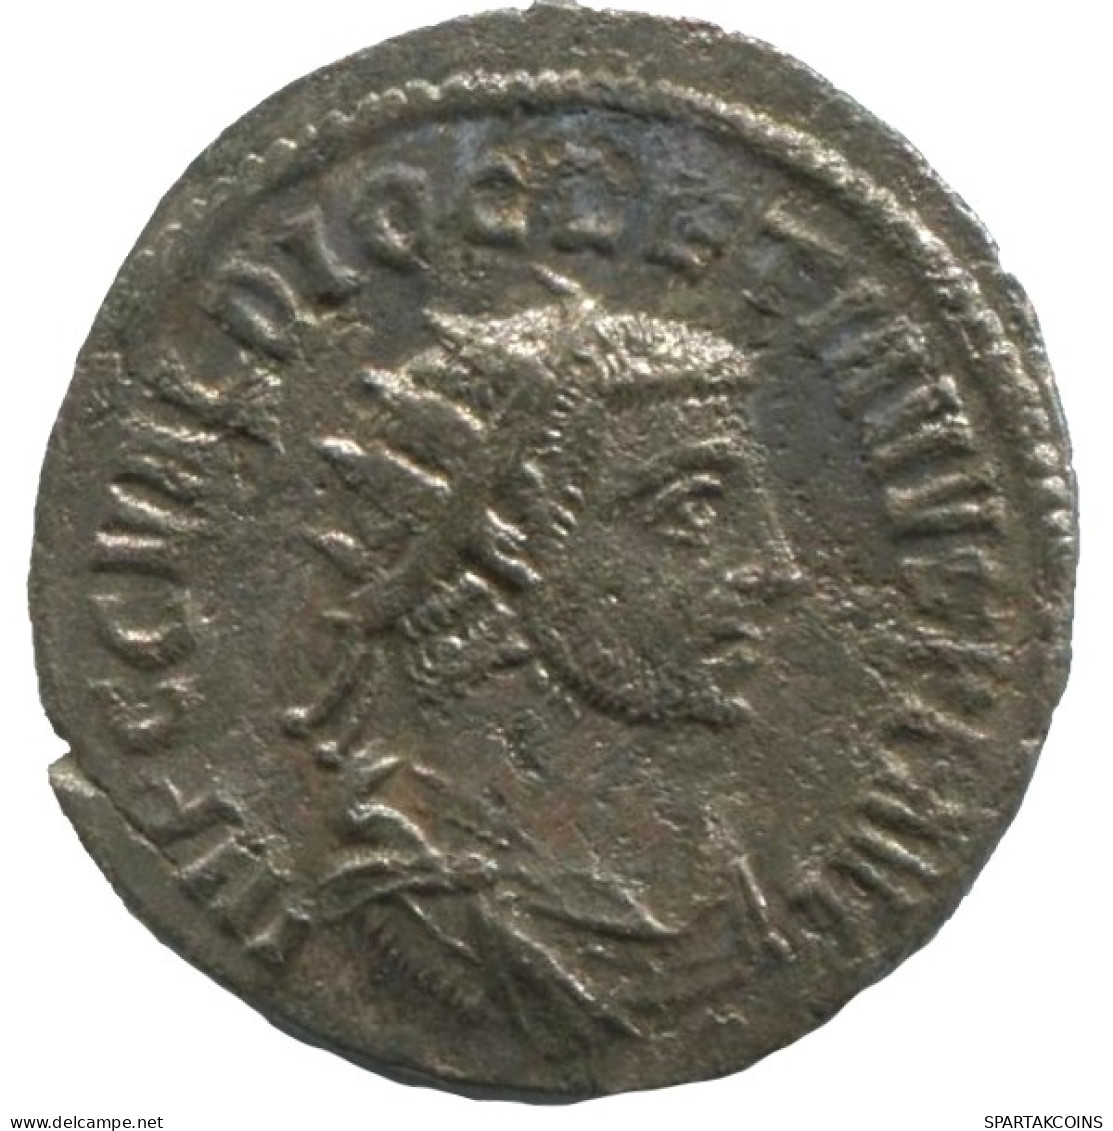 DIOCLETIAN ANTONINIANUS Antioch (? A/XXI) AD293 IOVETHERCVCONSER. #ANT1868.48.F.A - The Tetrarchy (284 AD To 307 AD)